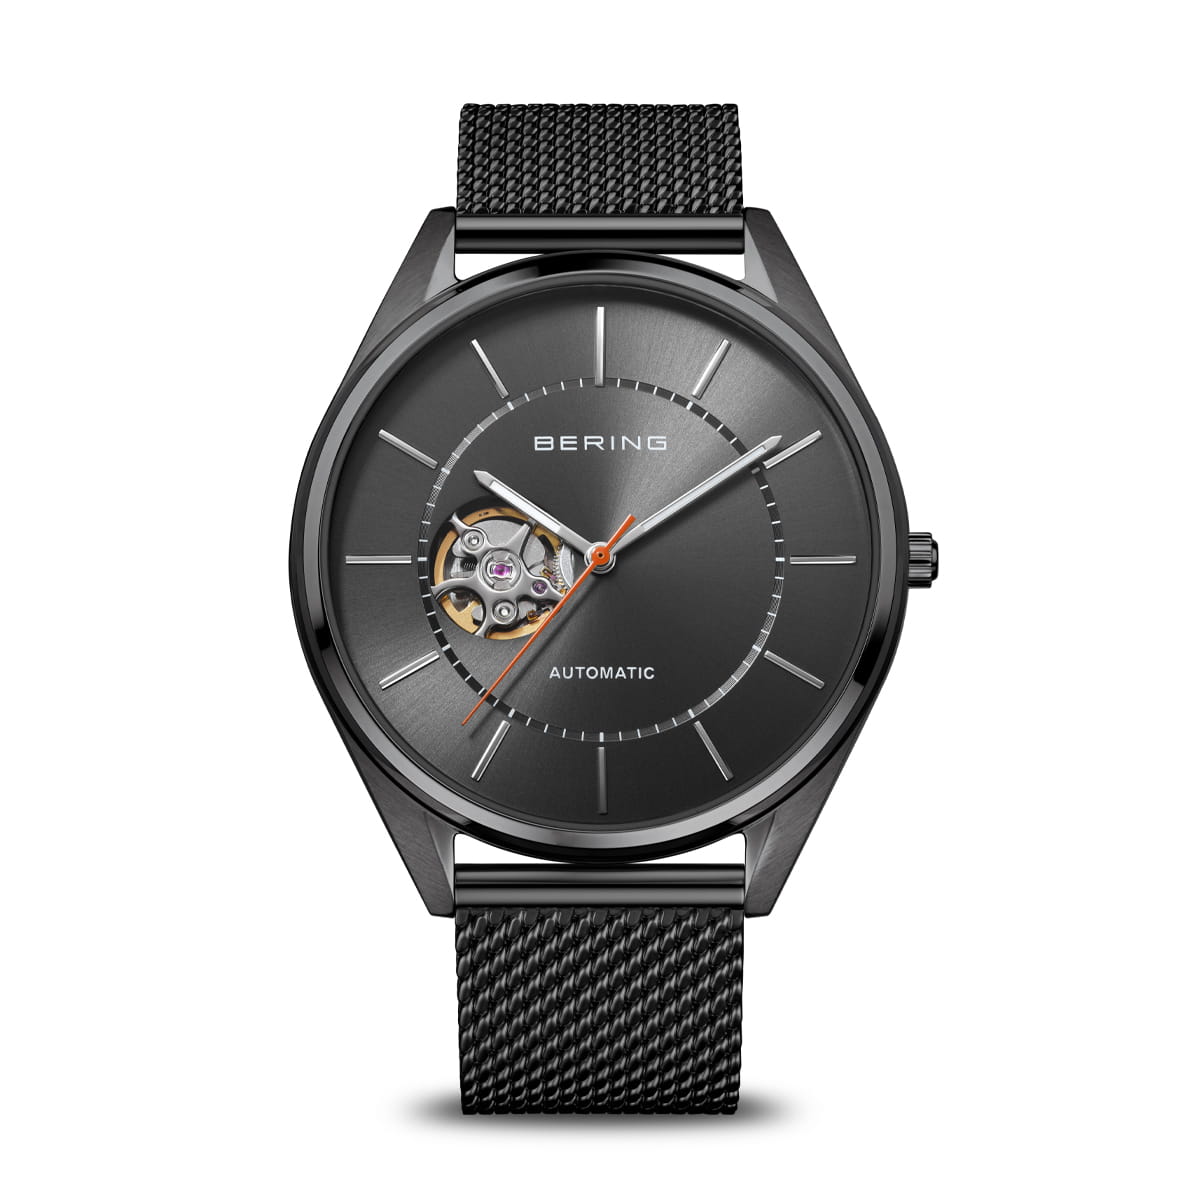 Bering Men's Watch | Automatic | Polished/Brushed Grey | Grey Dial | 16743-377